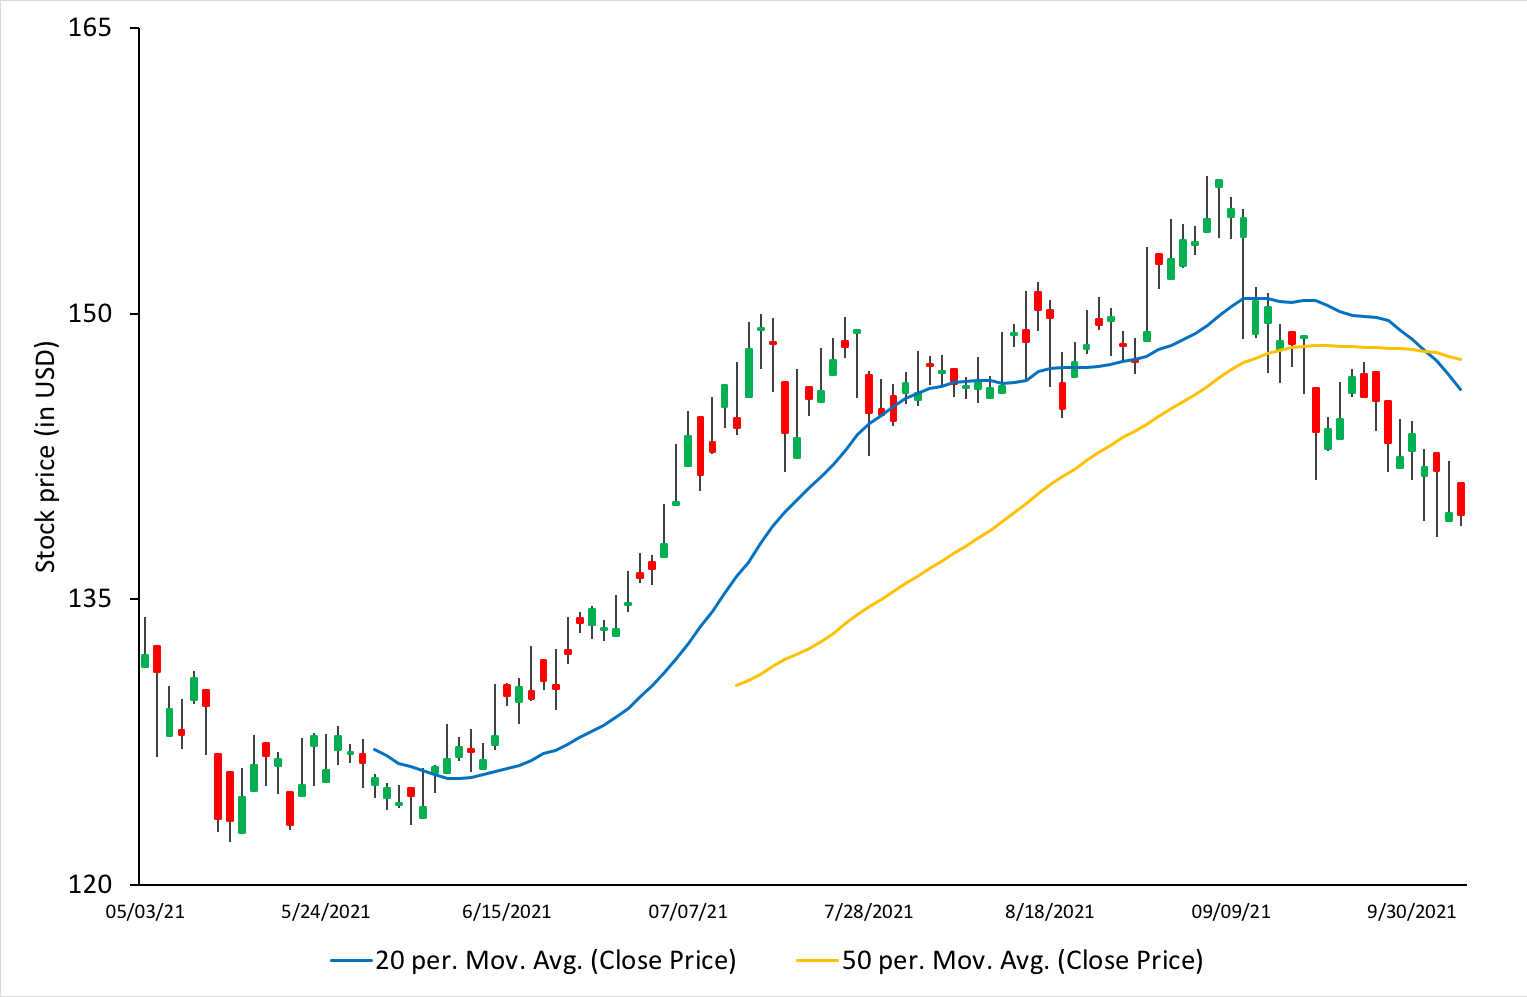 Moving averages in Apple stock